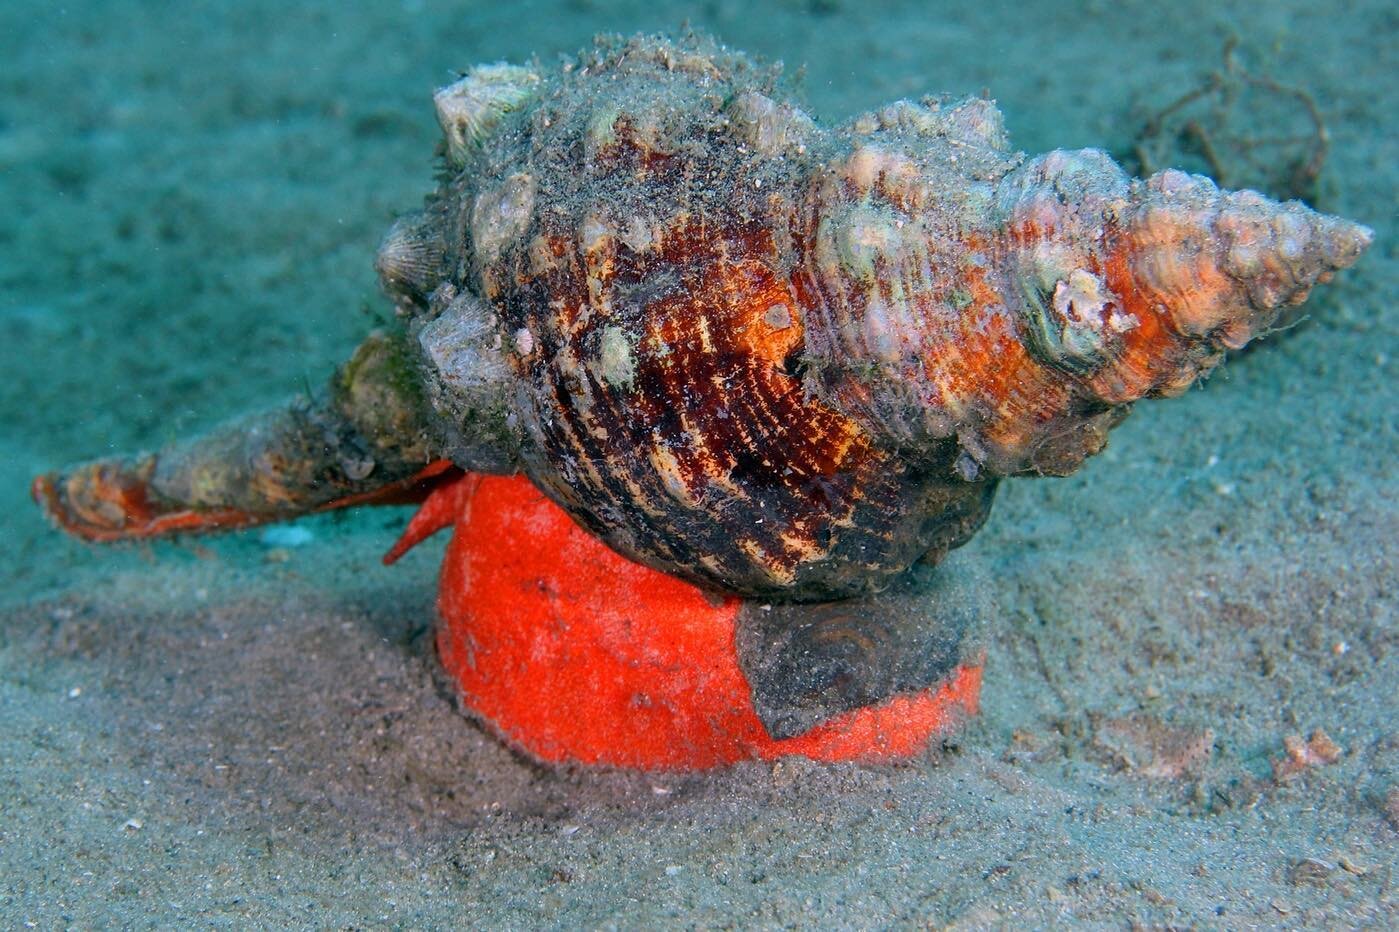 Florida&rsquo;s official state shell is the horse conch (Pleuroploca gigantea), since 1969! 🐚 🐌 

The horse conch is a very large saltwater snail and its shell can grow up to 2 feet in length. This is the largest snail living in North America and s